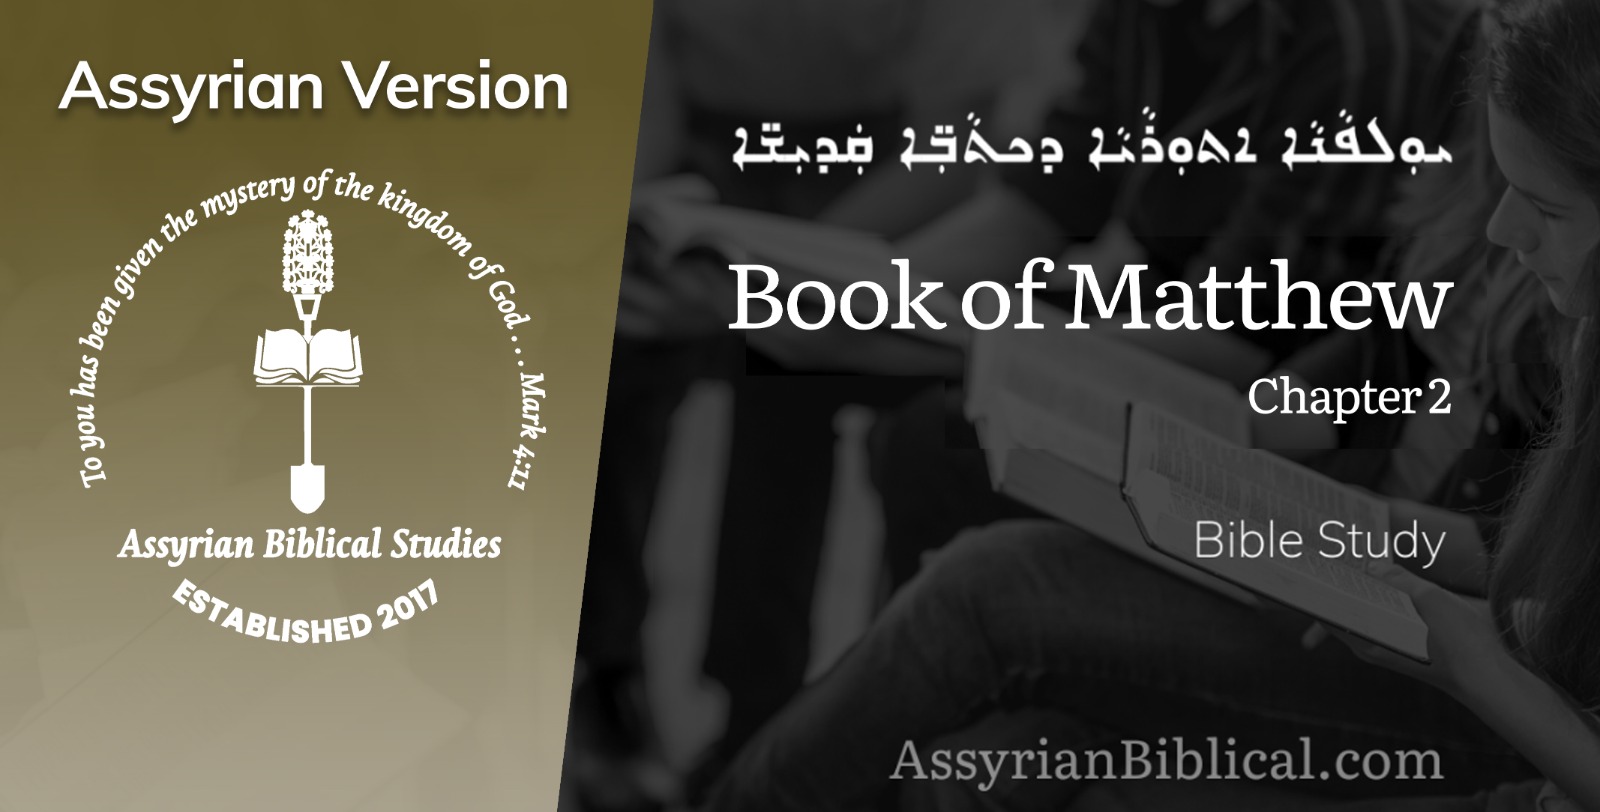 Image of video thumbnail for Book of Mathew Chapter 2 in Assyrian